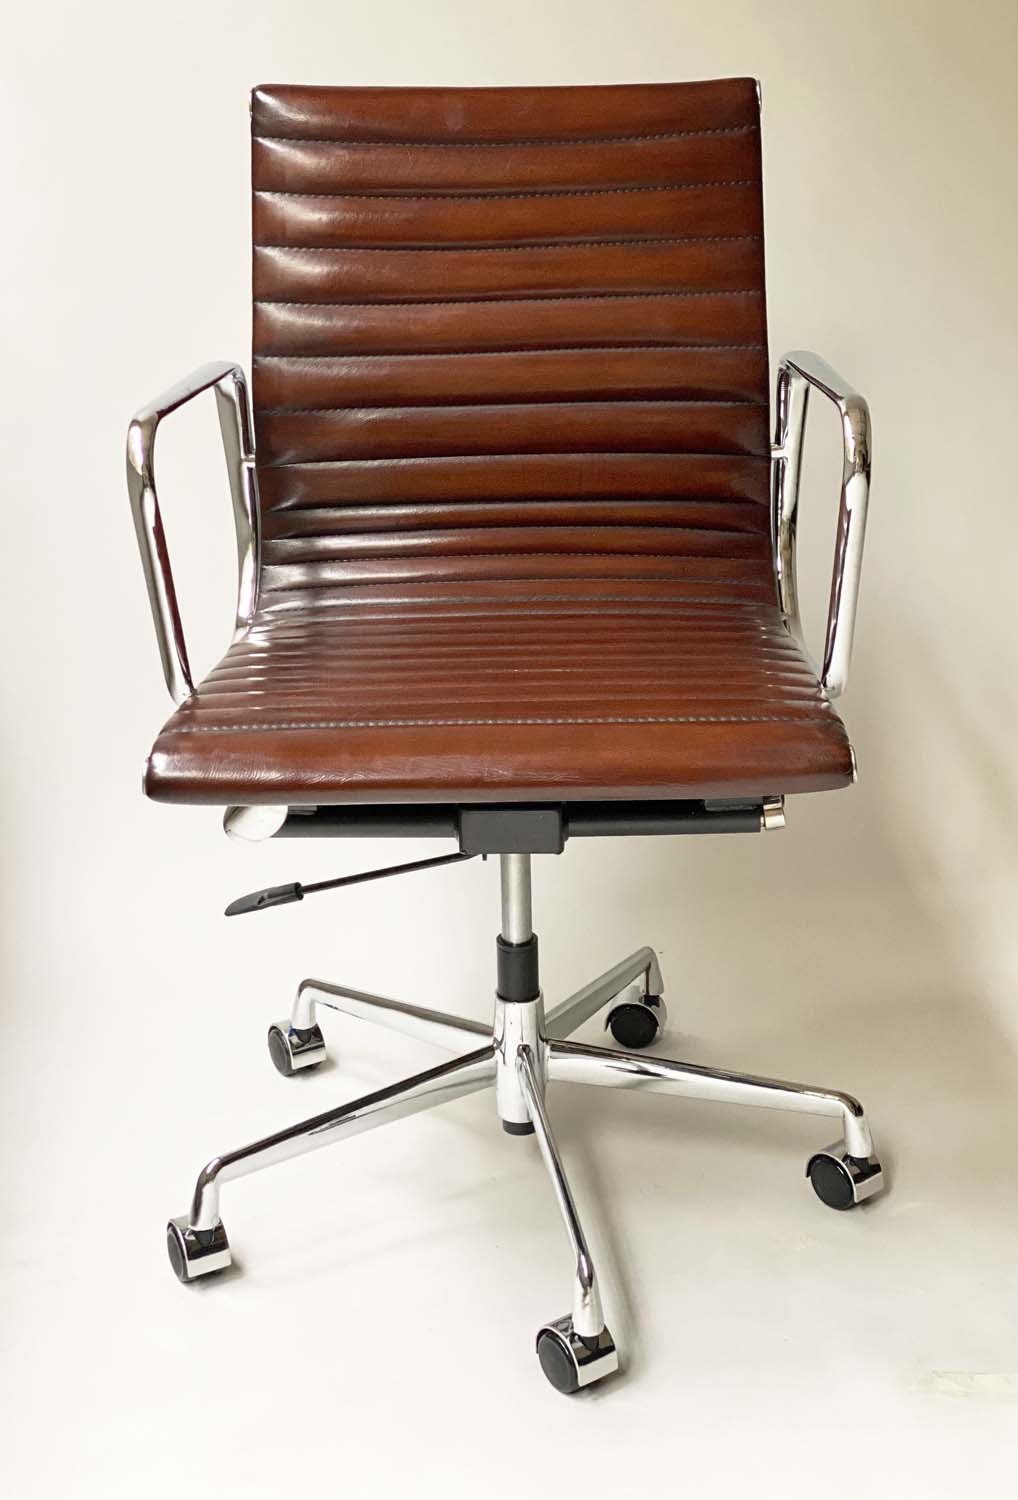 REVOLVING DESK CHAIR, Charles and Ray Eames inspired, with ribbed natural tan leather upholstered - Image 2 of 10